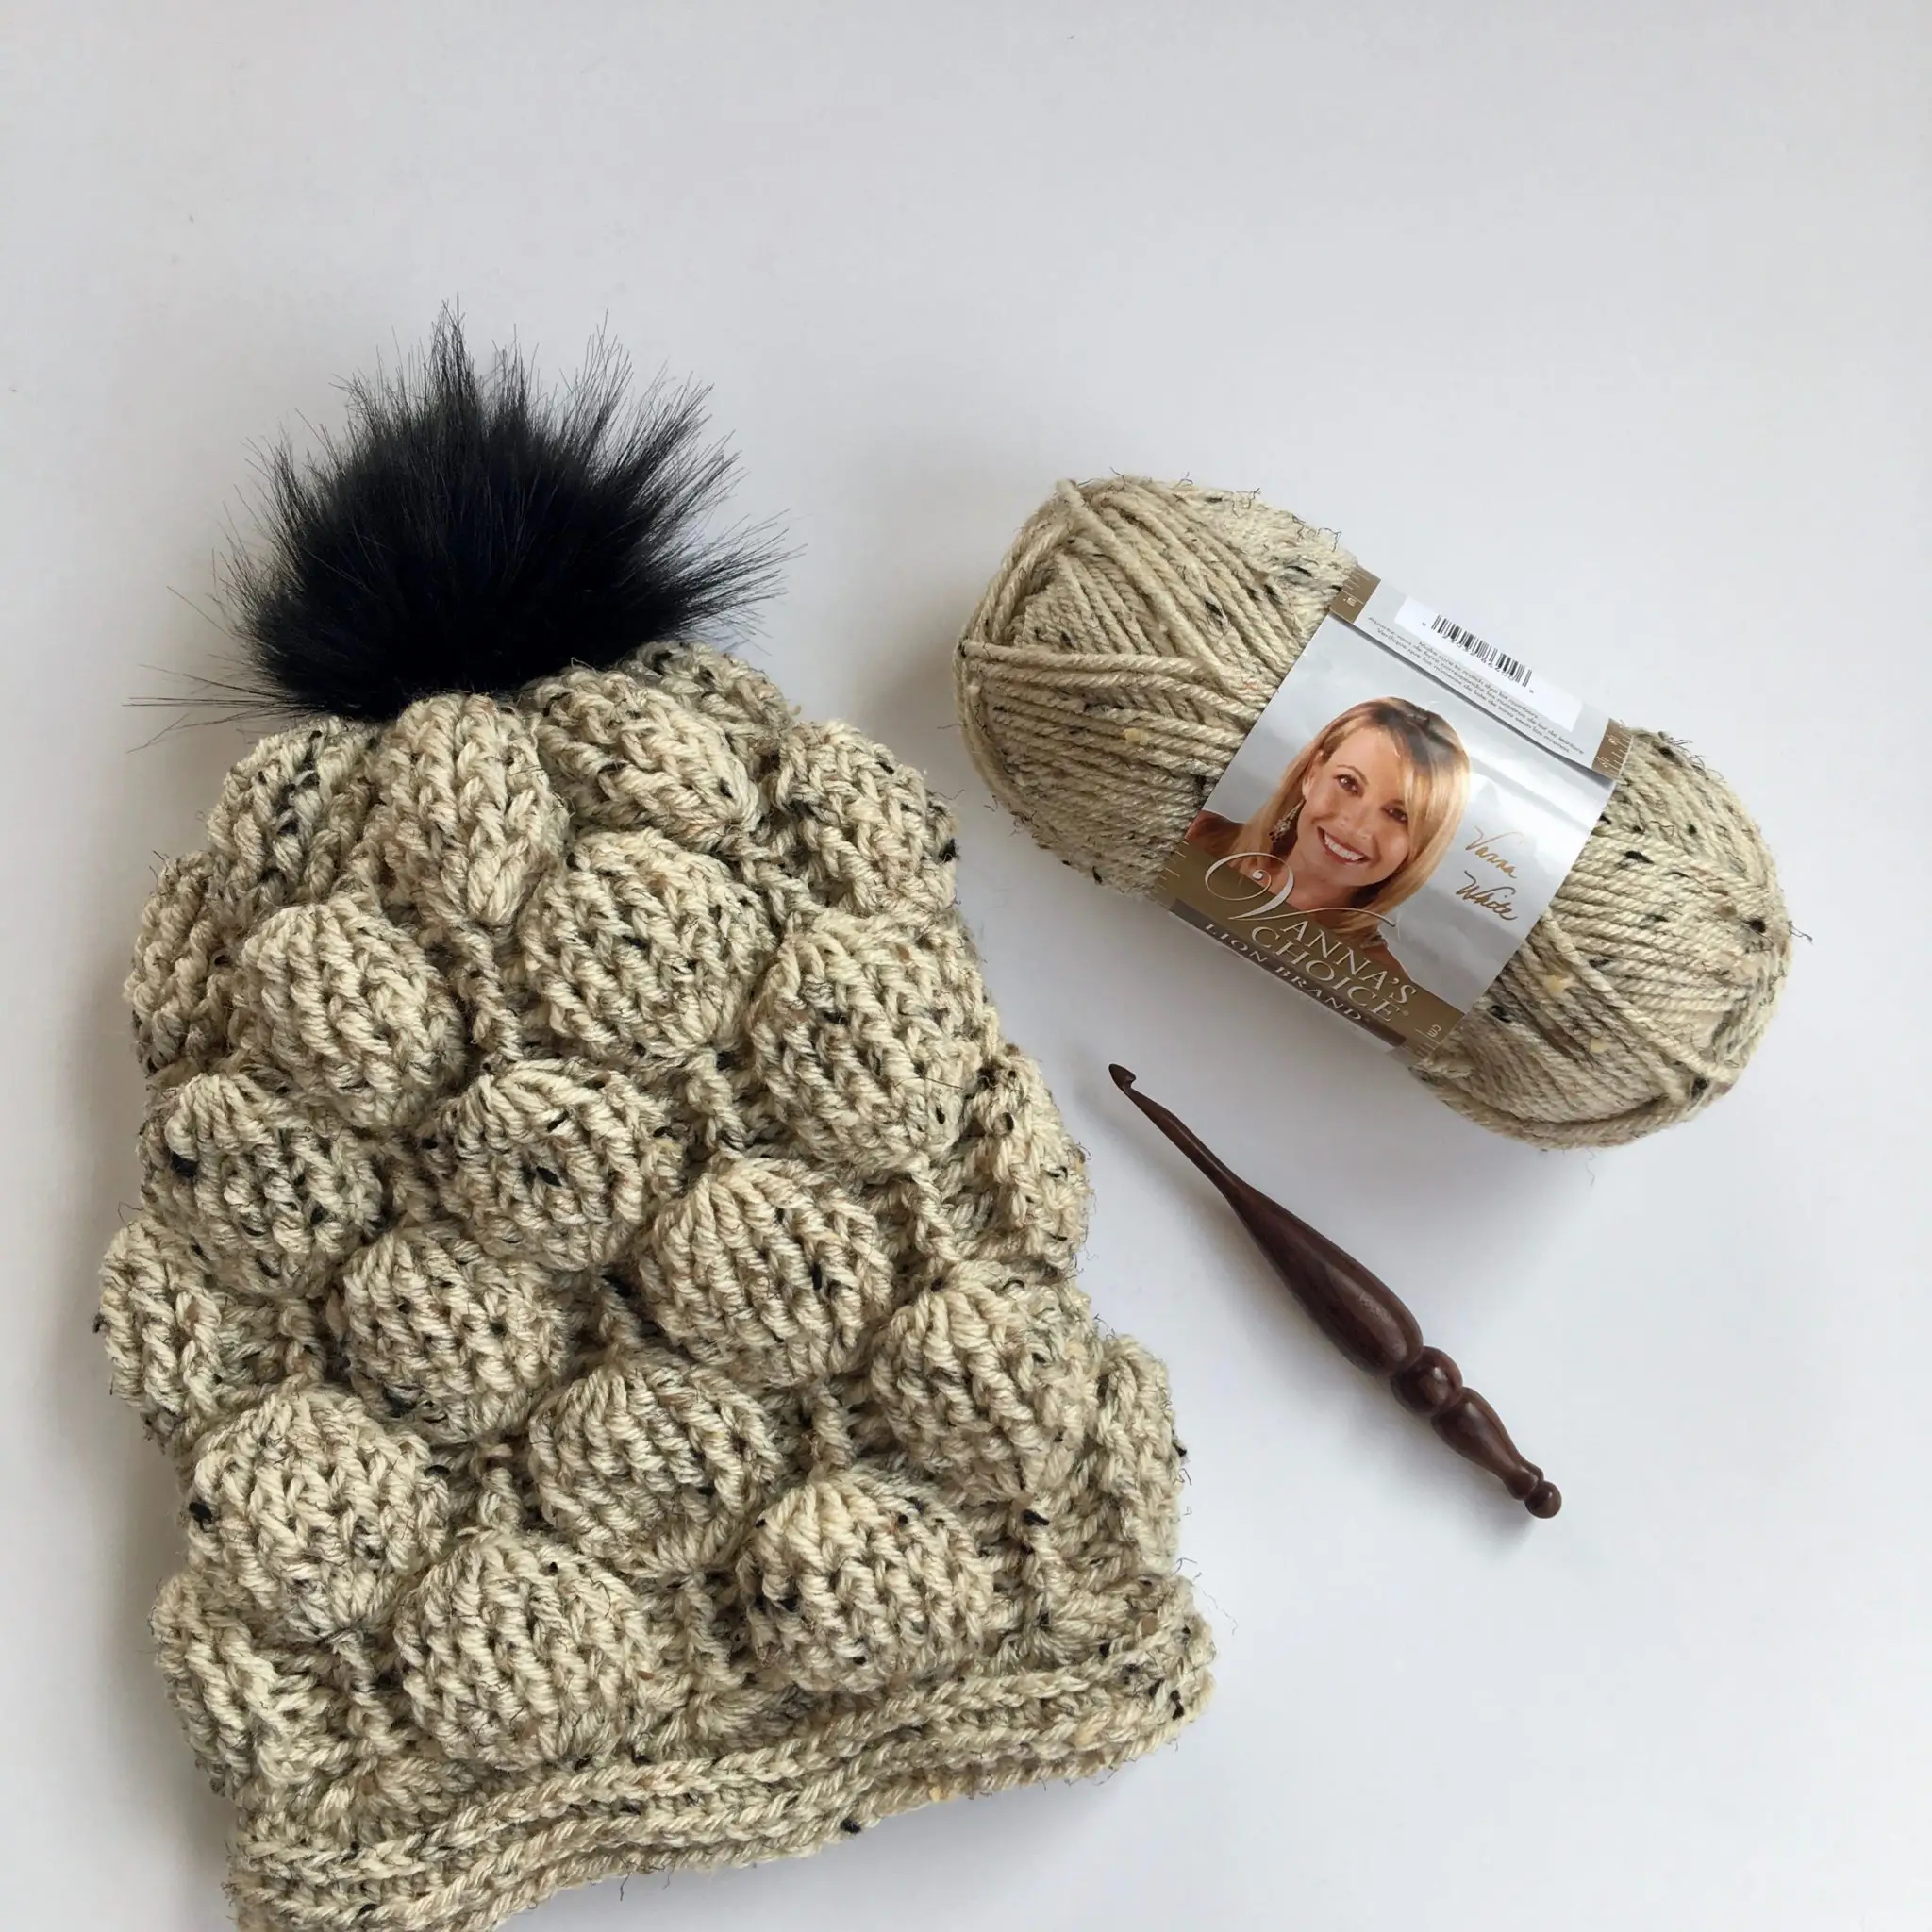 Balloon Stitch Slouchy Hat Complete Video Tutorial